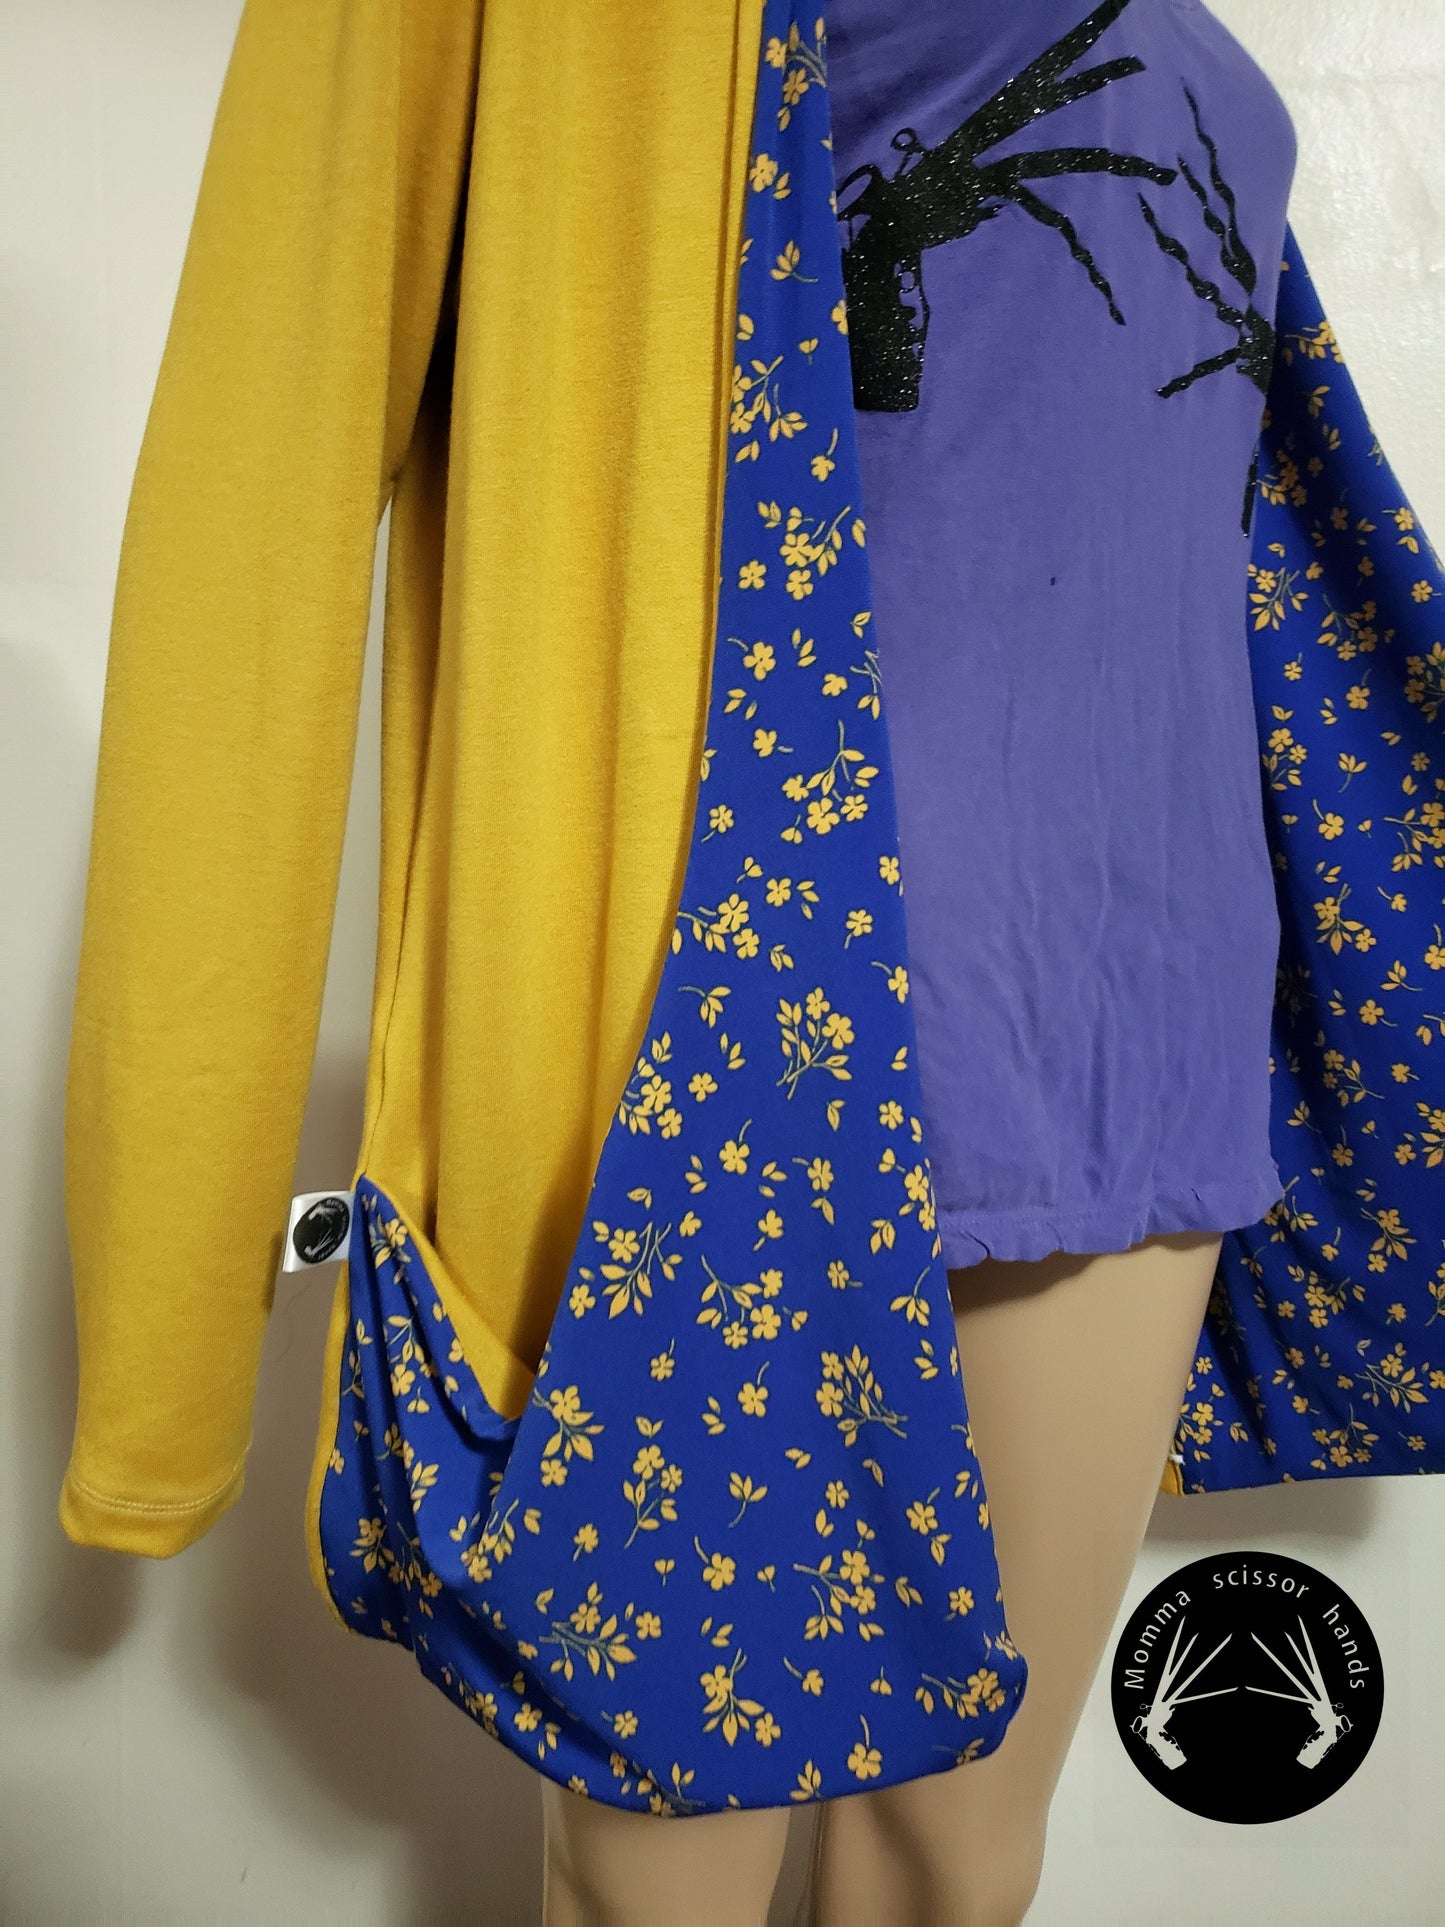 Large mustard cardigan with blue floral pockets